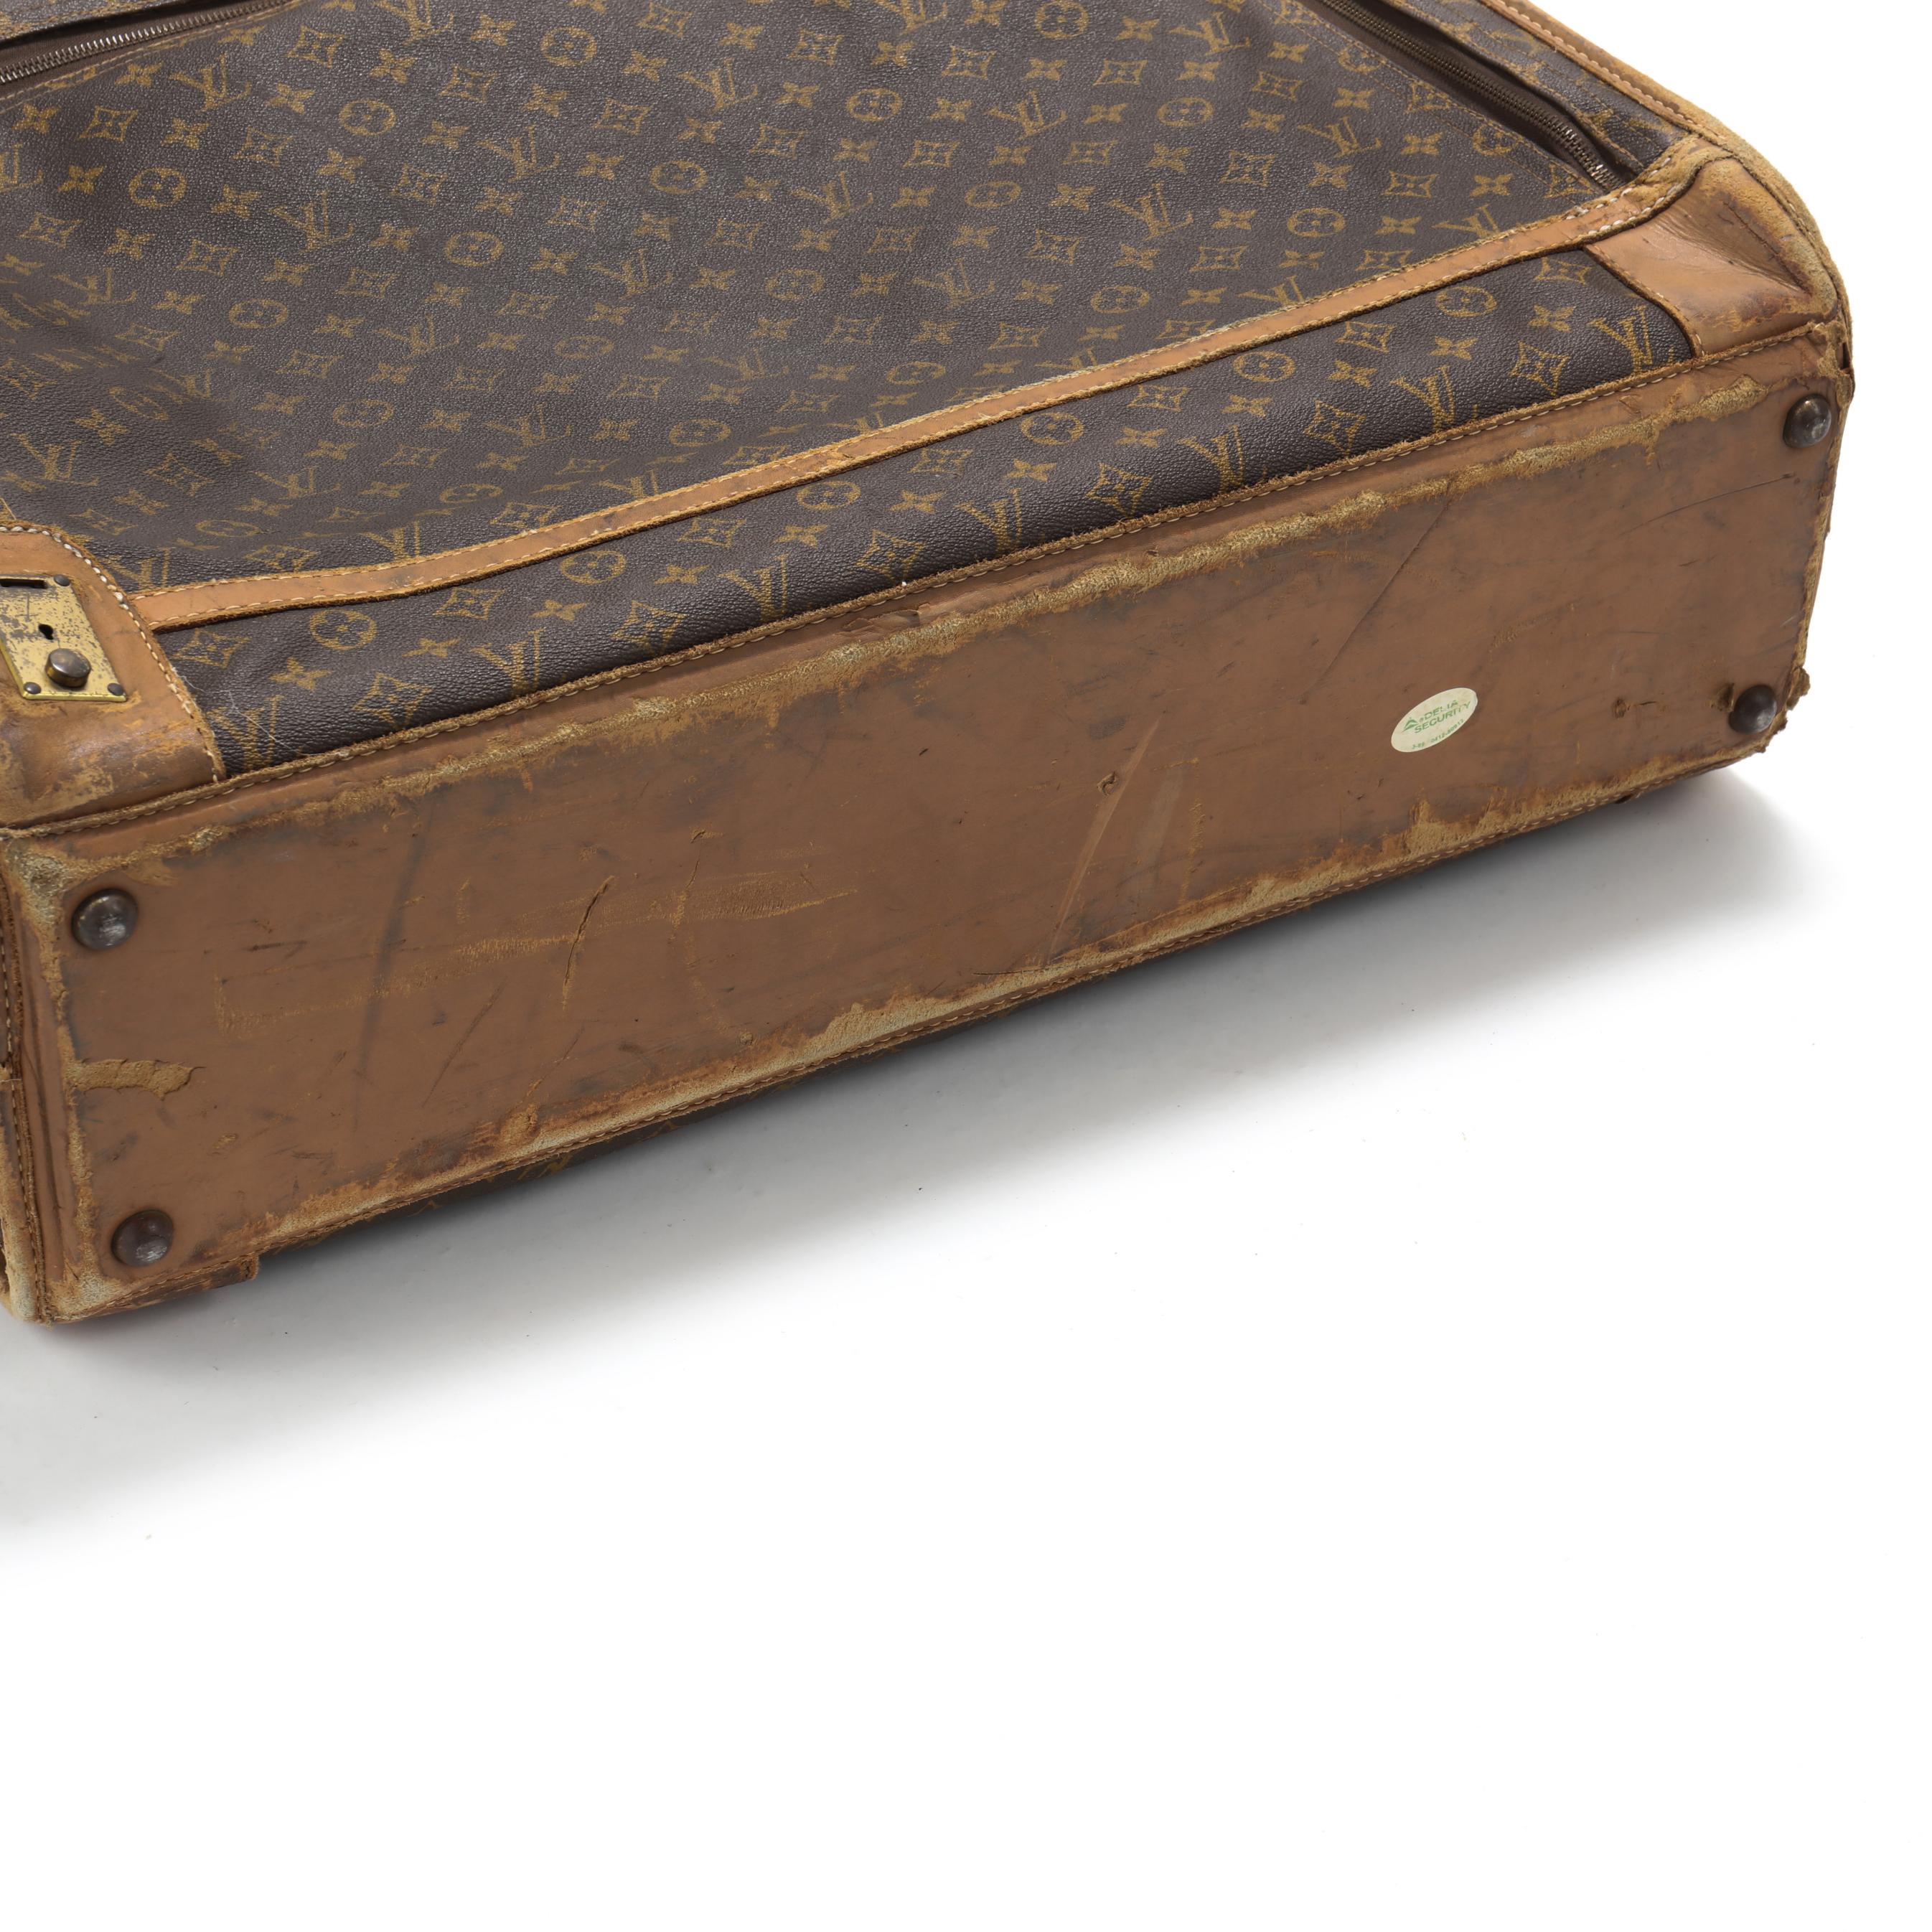 French Company for Louis Vuitton Shoe Bag and Pullman Suitcase